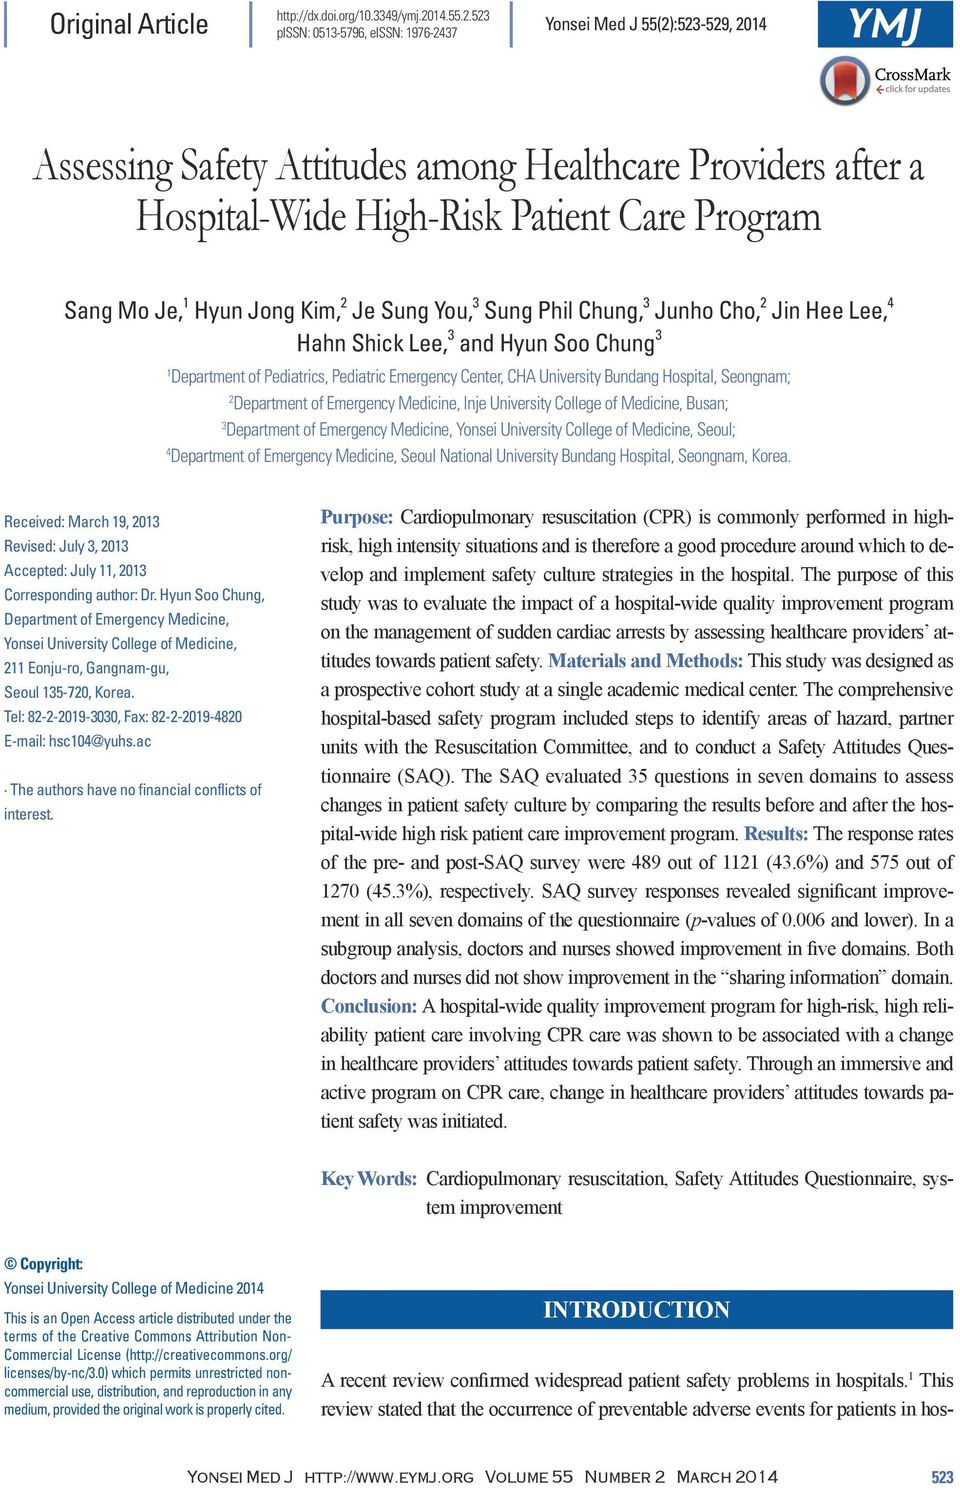 523 pissn: 0513-5796, eissn: 1976-2437 Yonsei Med J 55(2):523-529, 2014 Assessing Safety Attitudes among Healthcare Providers after a Hospital-Wide High-Risk Patient Care Program Sang Mo Je, 1 Hyun